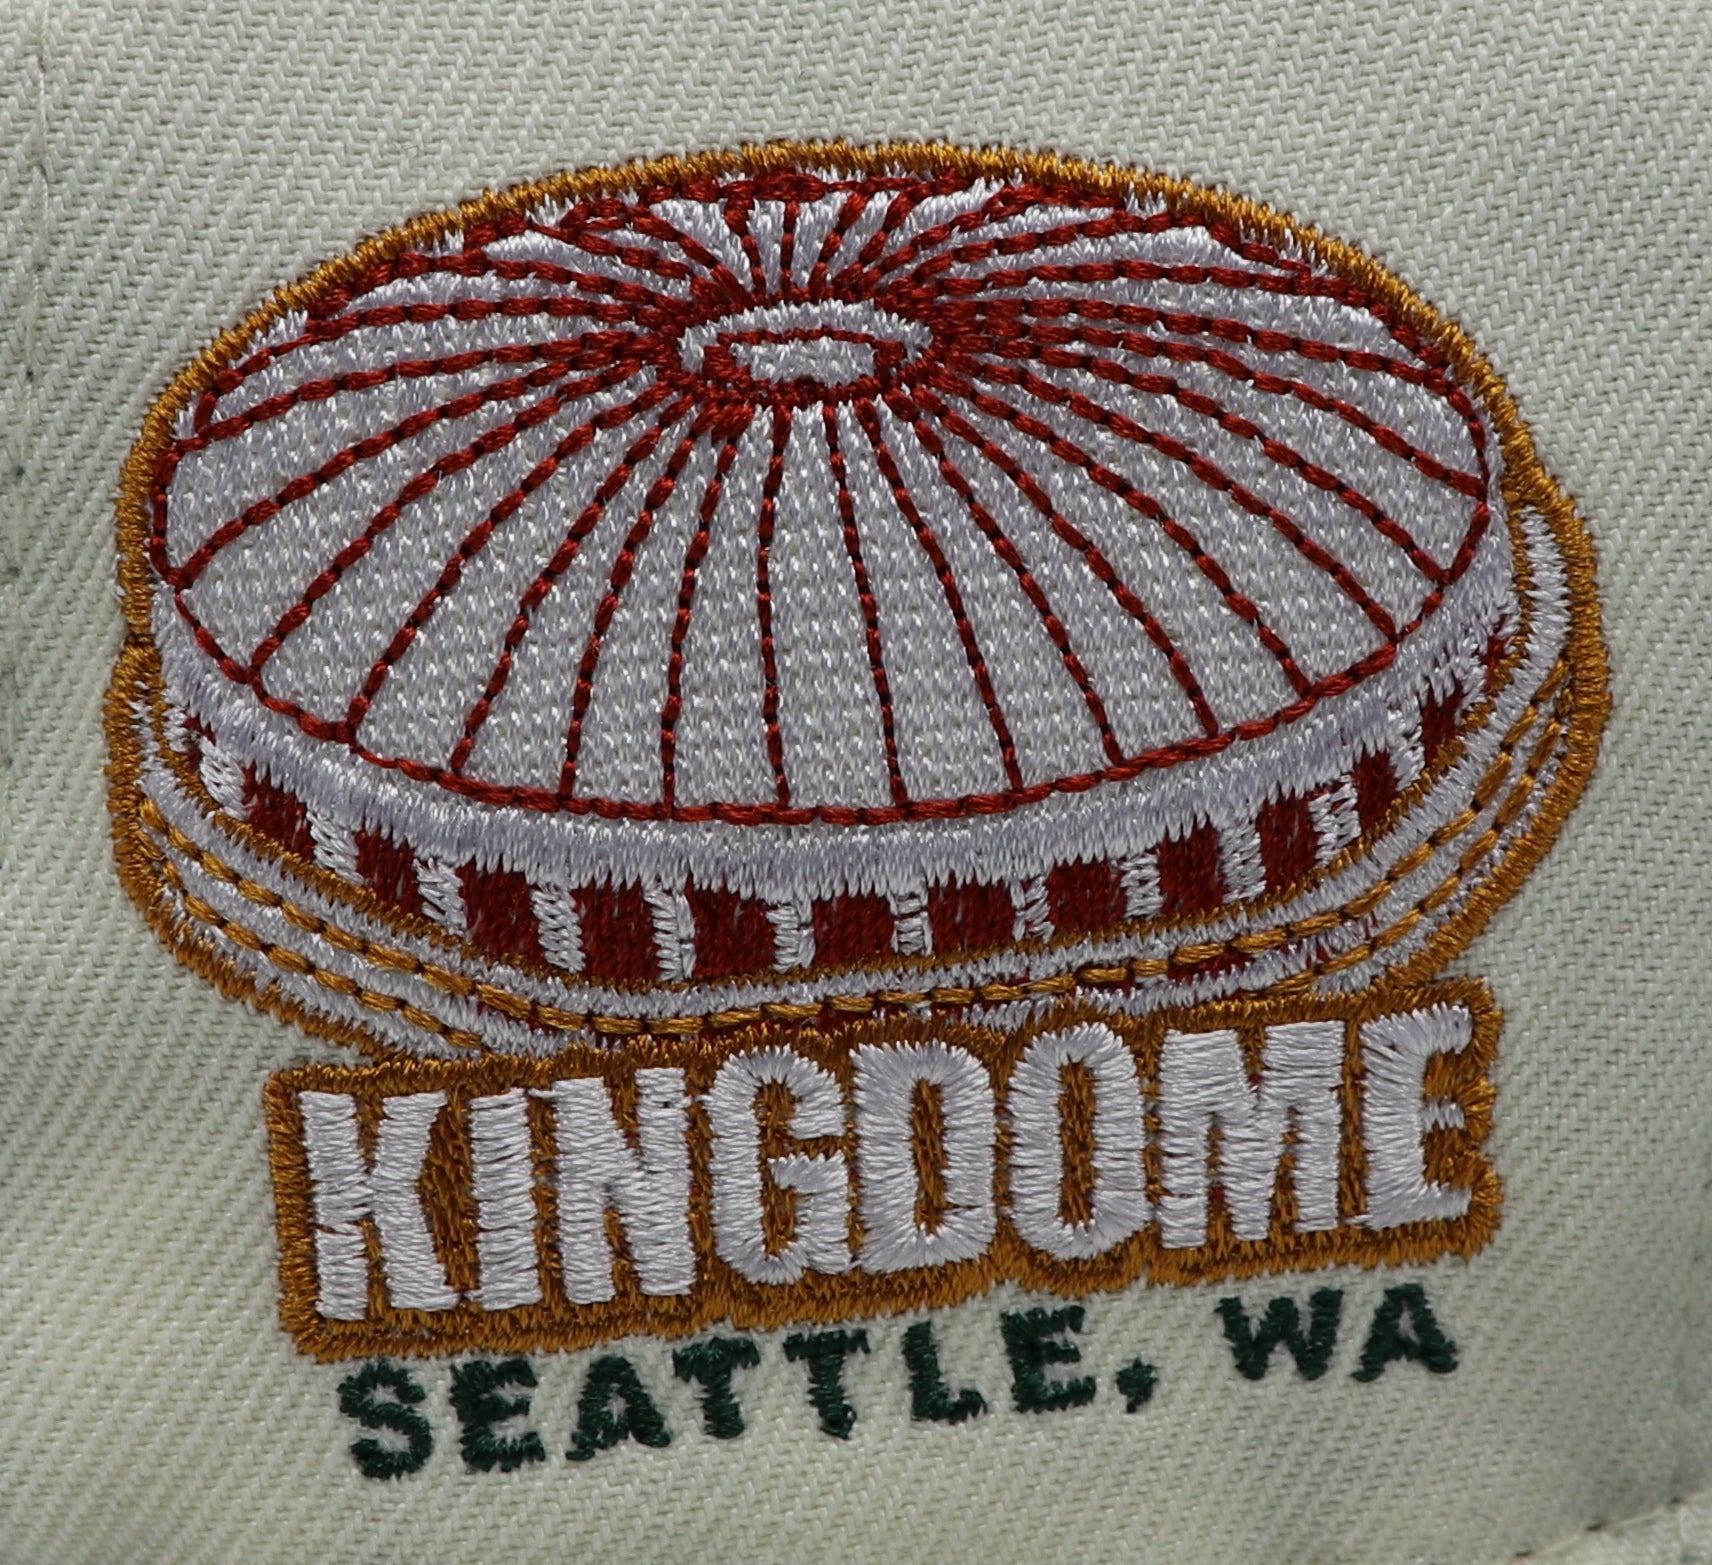 SEATTLE MARINERS (OFF-WHITE) KINGDOME NEW ERA 59FIFTY FITTED (RED UNDER VISOR)